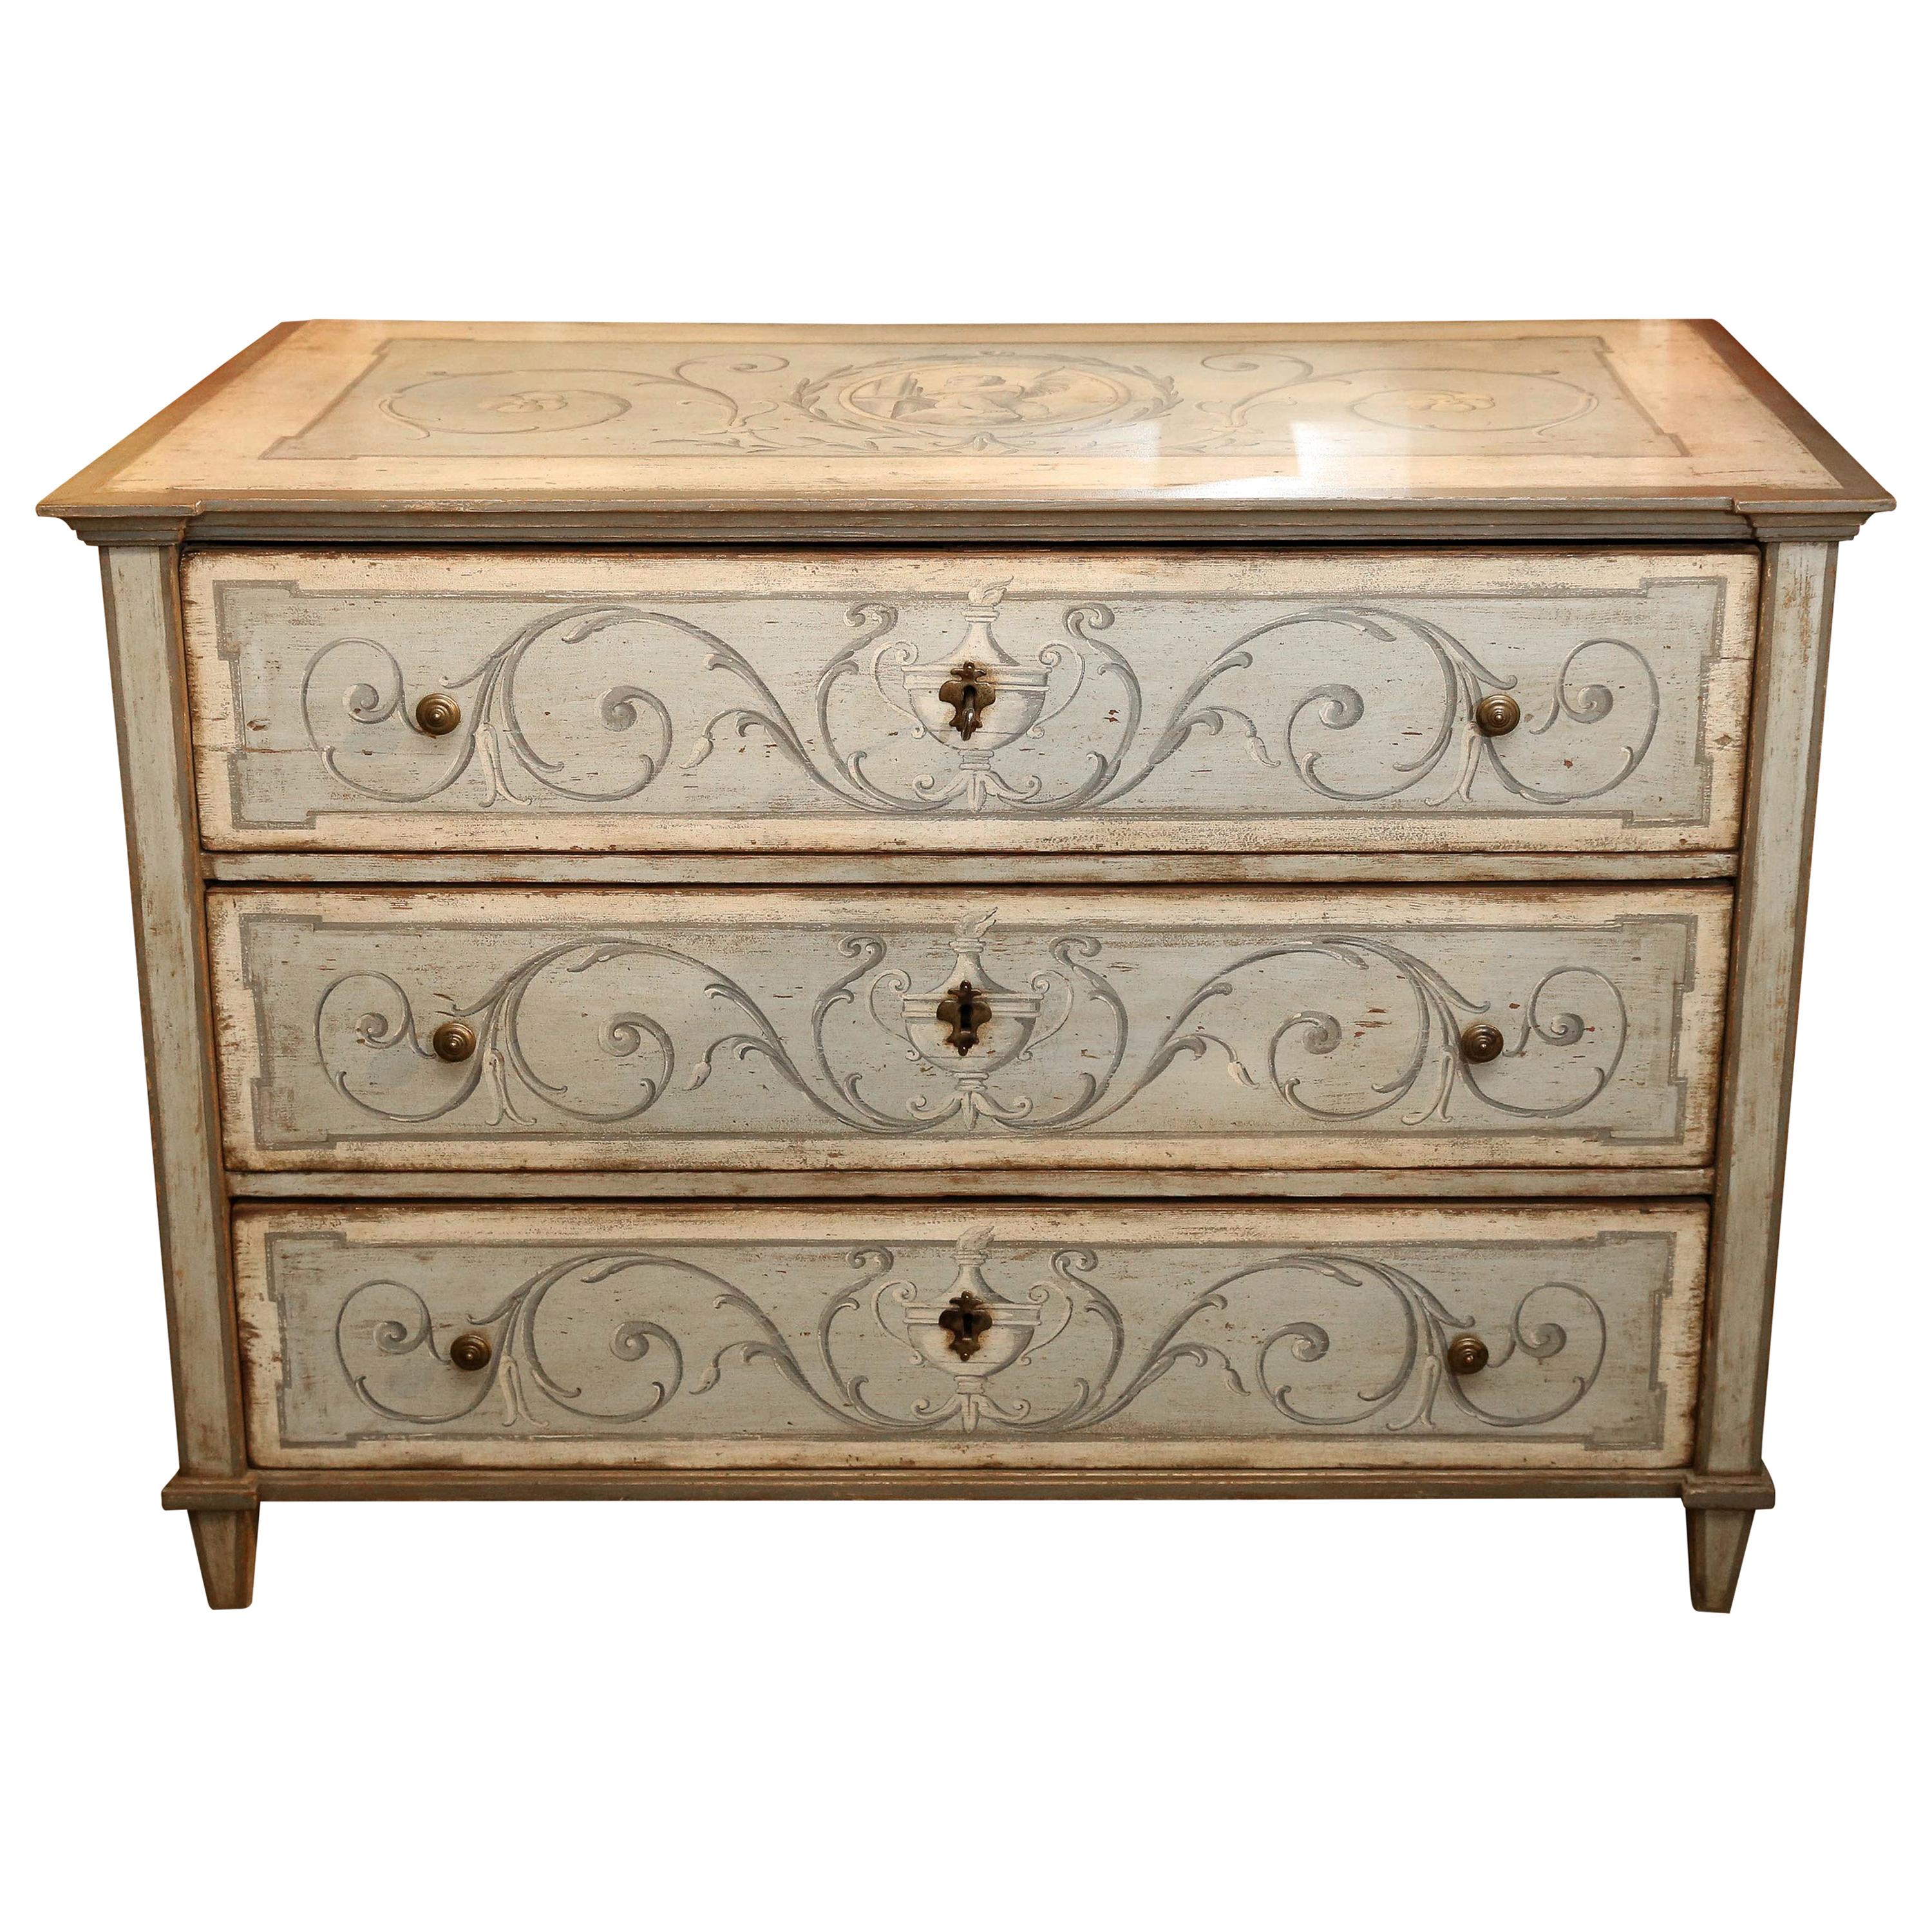 Polychromed Italian Neoclassical-Style Chest, 19th Century For Sale